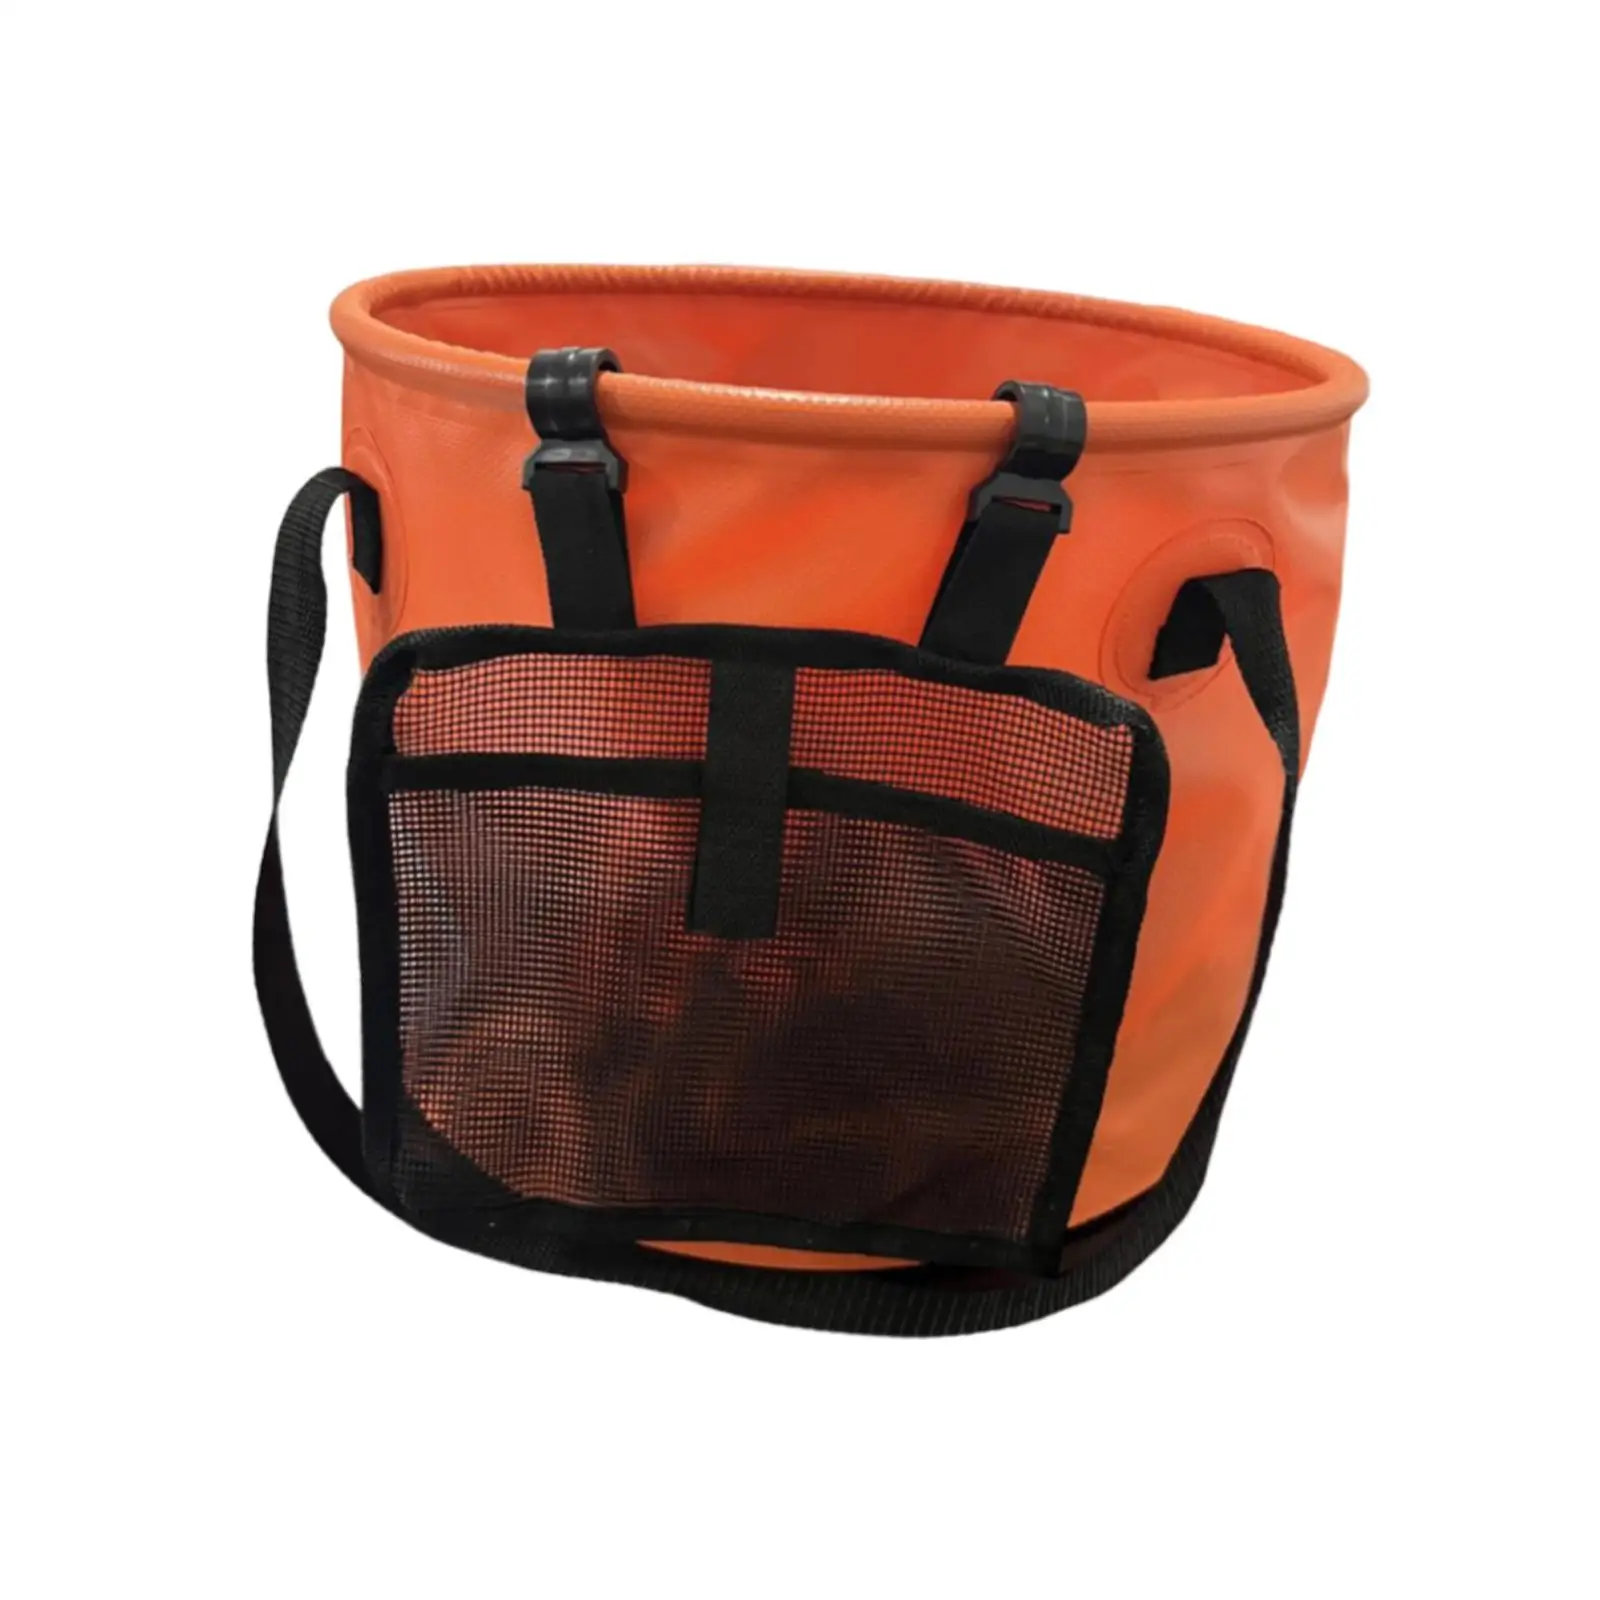 Collapsible Bucket Multifunctional Fishing Bucket 28L Folding Water Storage Bucket for Camping Outdoor Fishing Beach Travelling